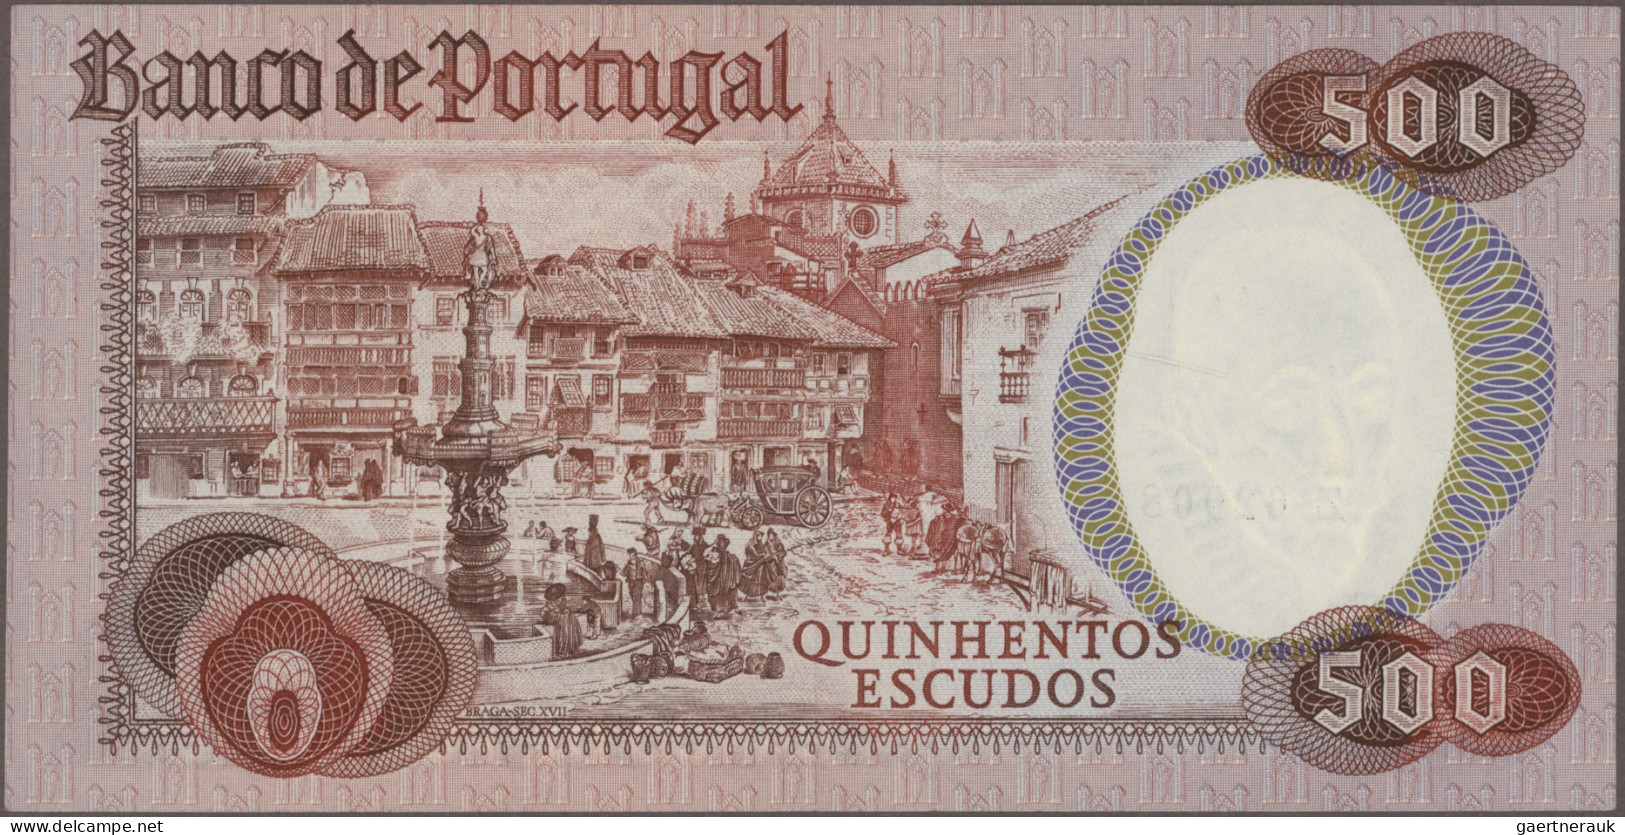 Portugal: Banco de Portugal, lot with 14 banknotes, series 1964-1981, comprising